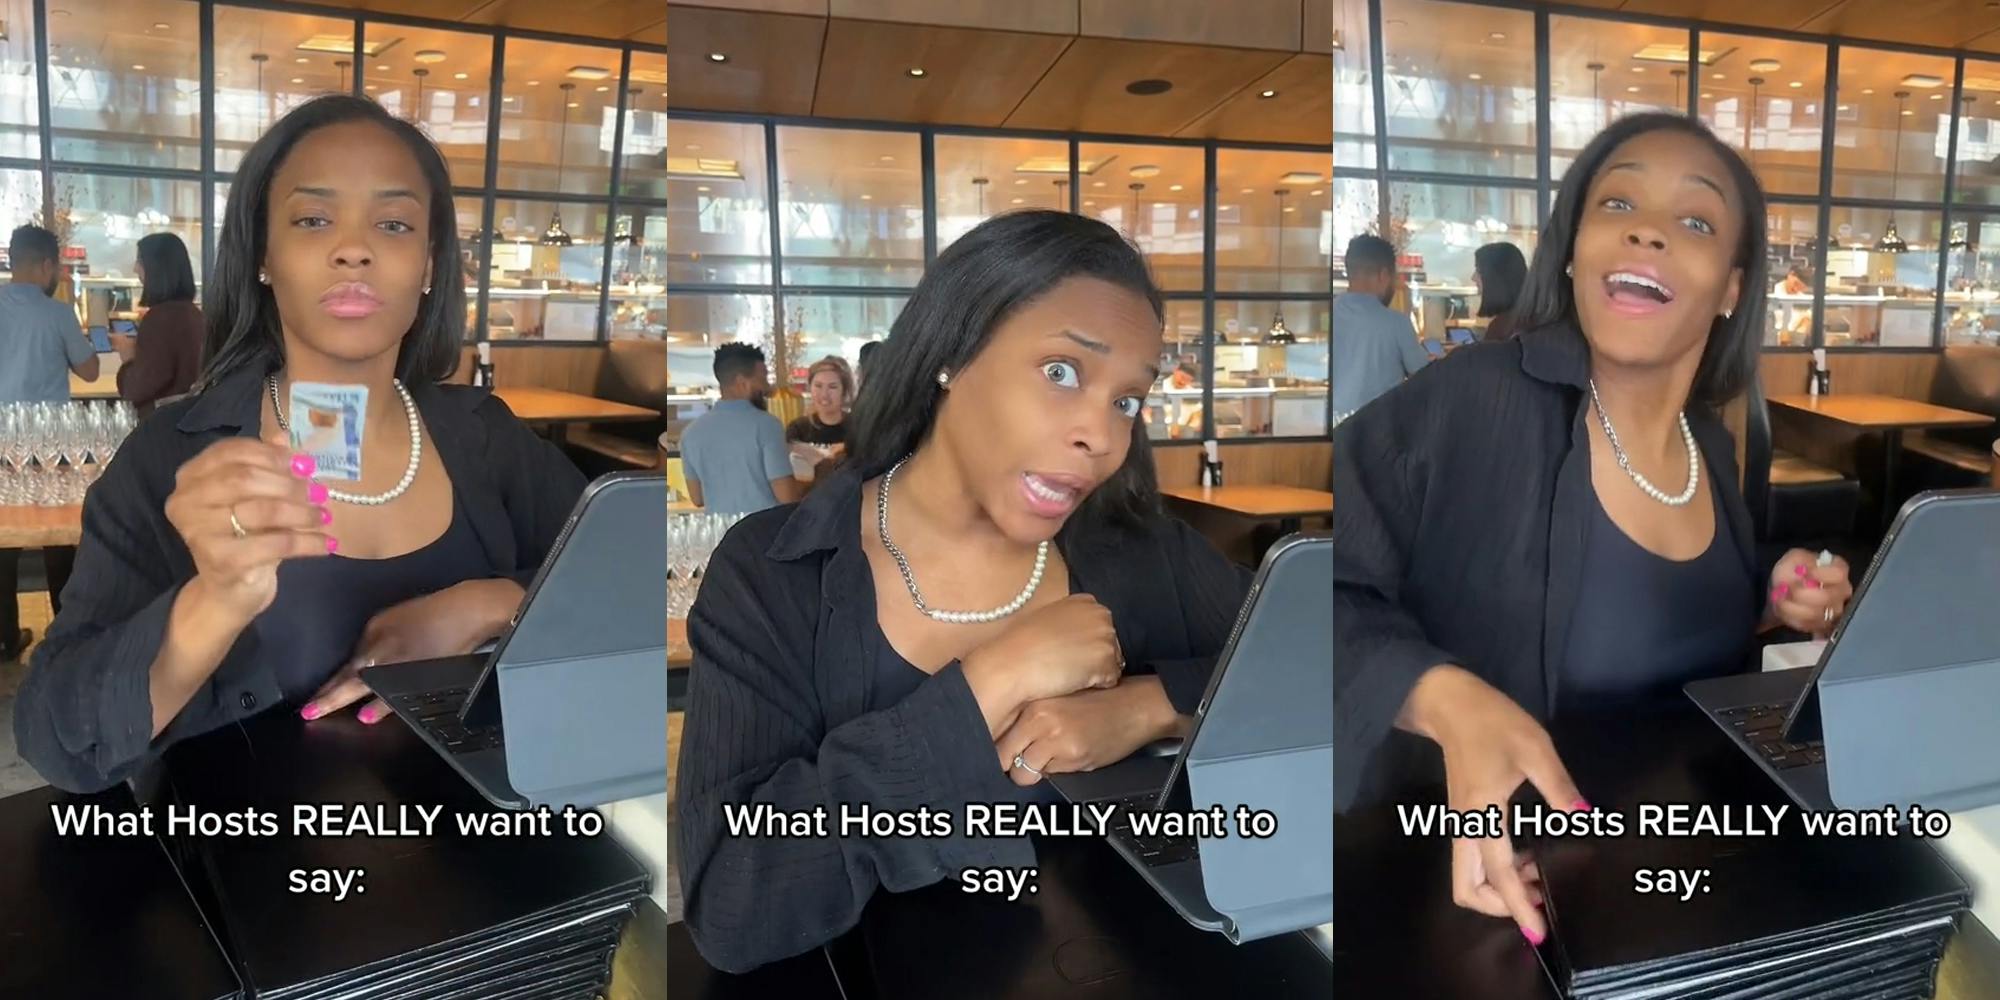 restaurant host holding cash with caption "What Hosts REALLY want to say:" (l) restaurant host speaking with caption "What Hosts REALLY want to say:" (c) restaurant host speaking with caption "What Hosts REALLY want to say:" (r)